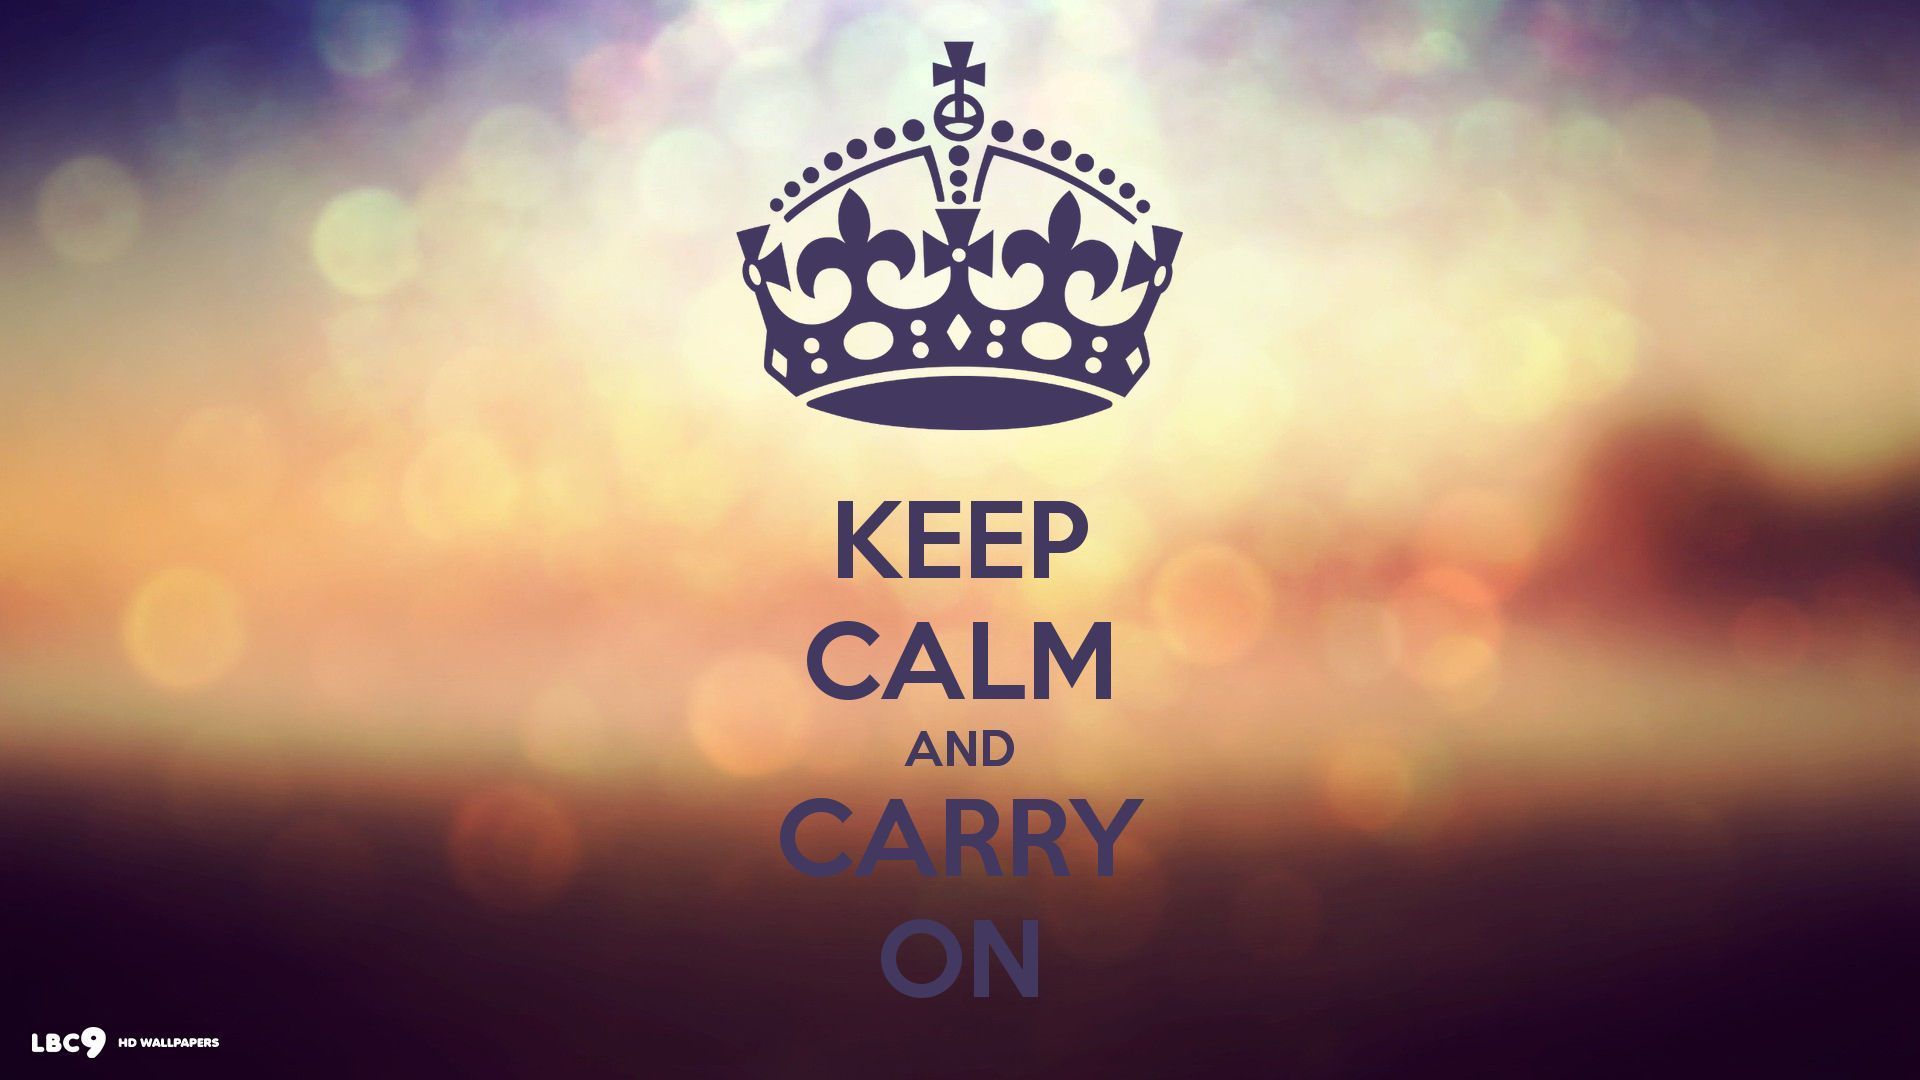 keep calm and carry on wallpaper 4/25 | typography hd backgrounds